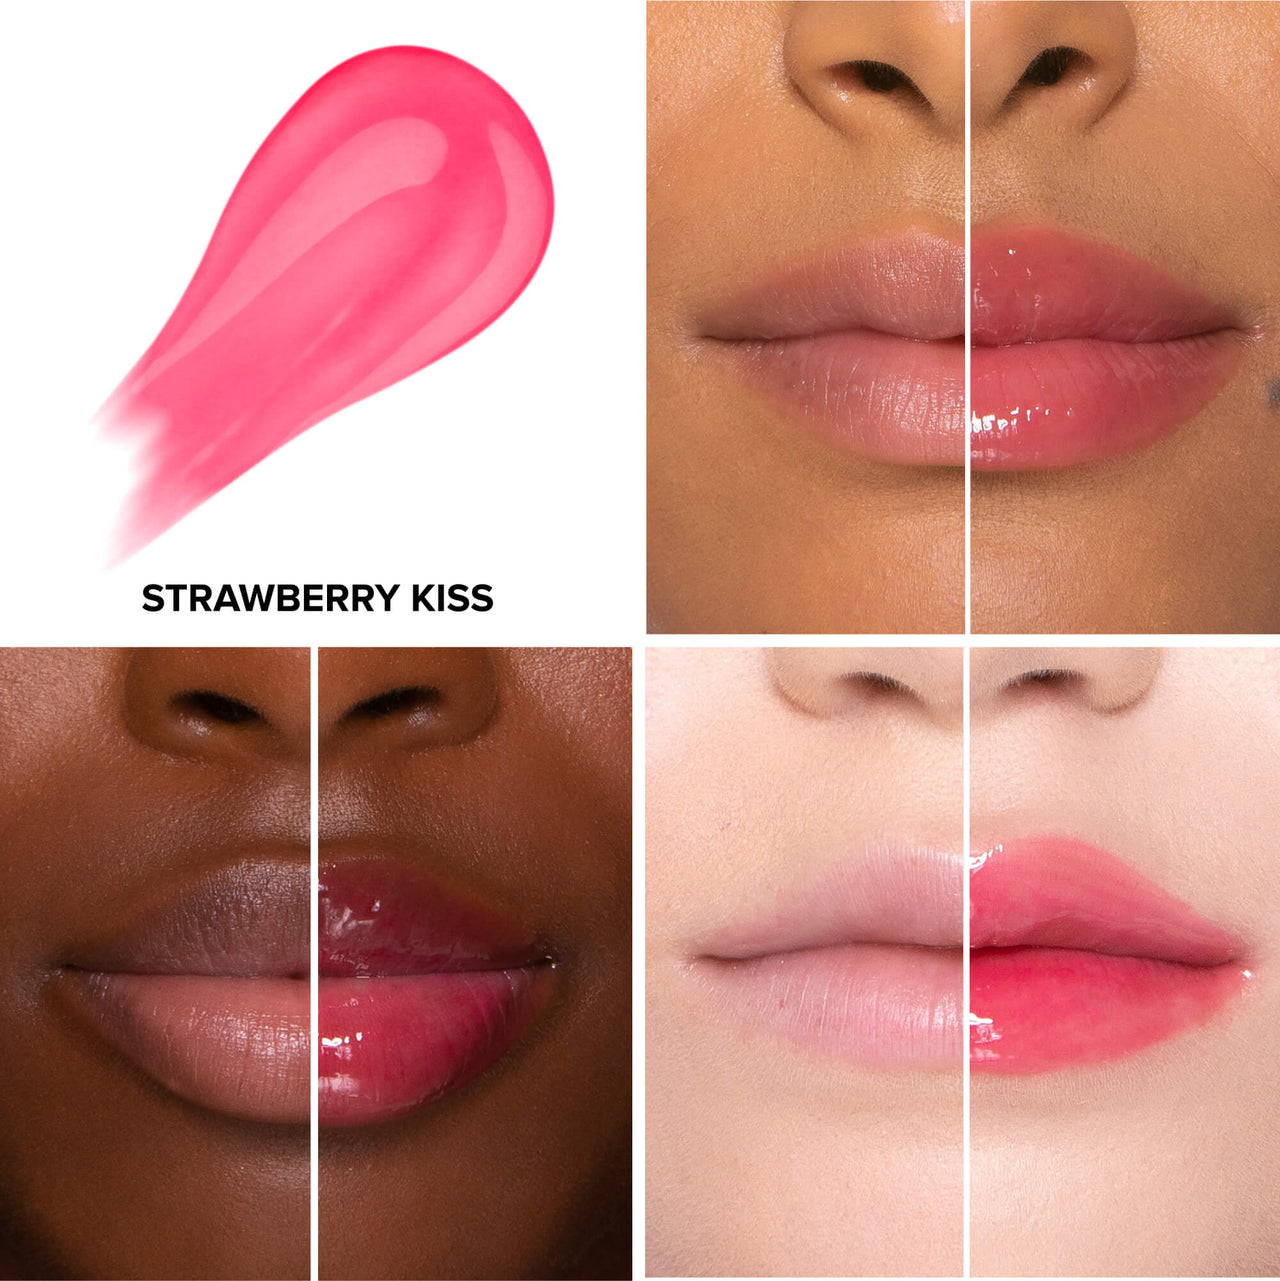 Too Faced "Strawberry Kiss" Lip Injections Extreme Hydrating Plumping Lip Gloss